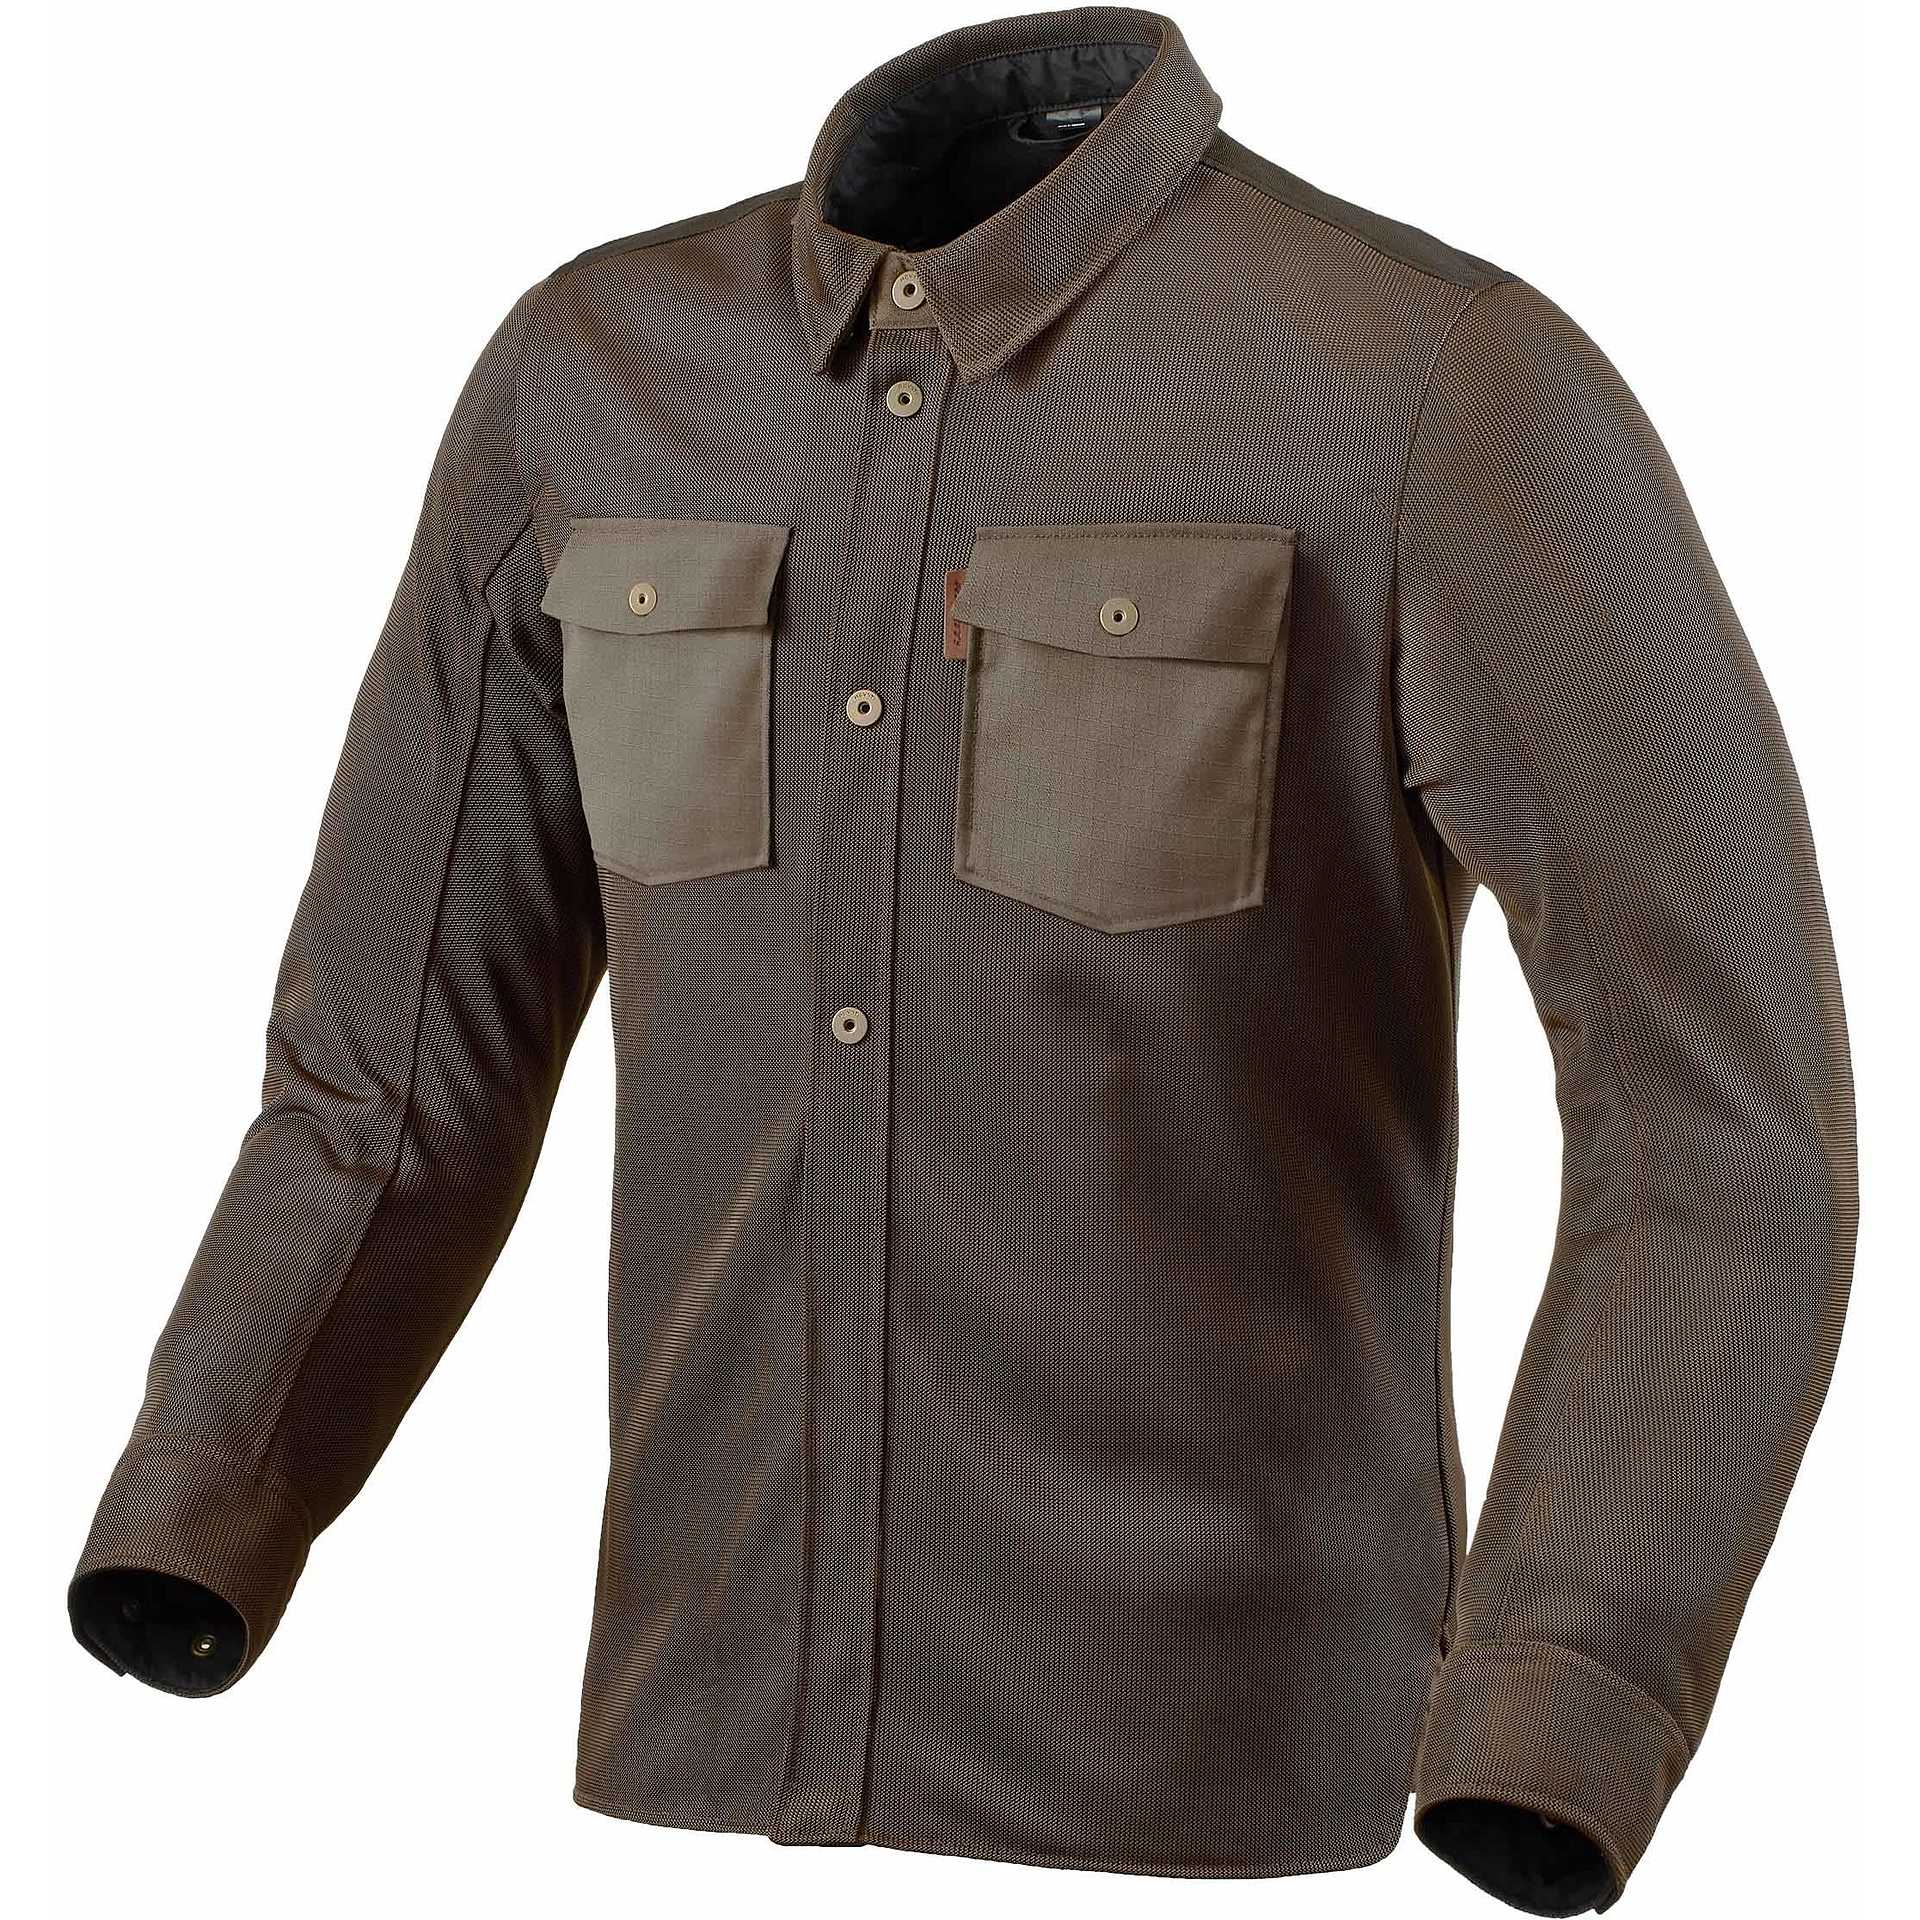 Image of REV'IT! Overshirt Tracer Air 2 Jacket Brown Talla S